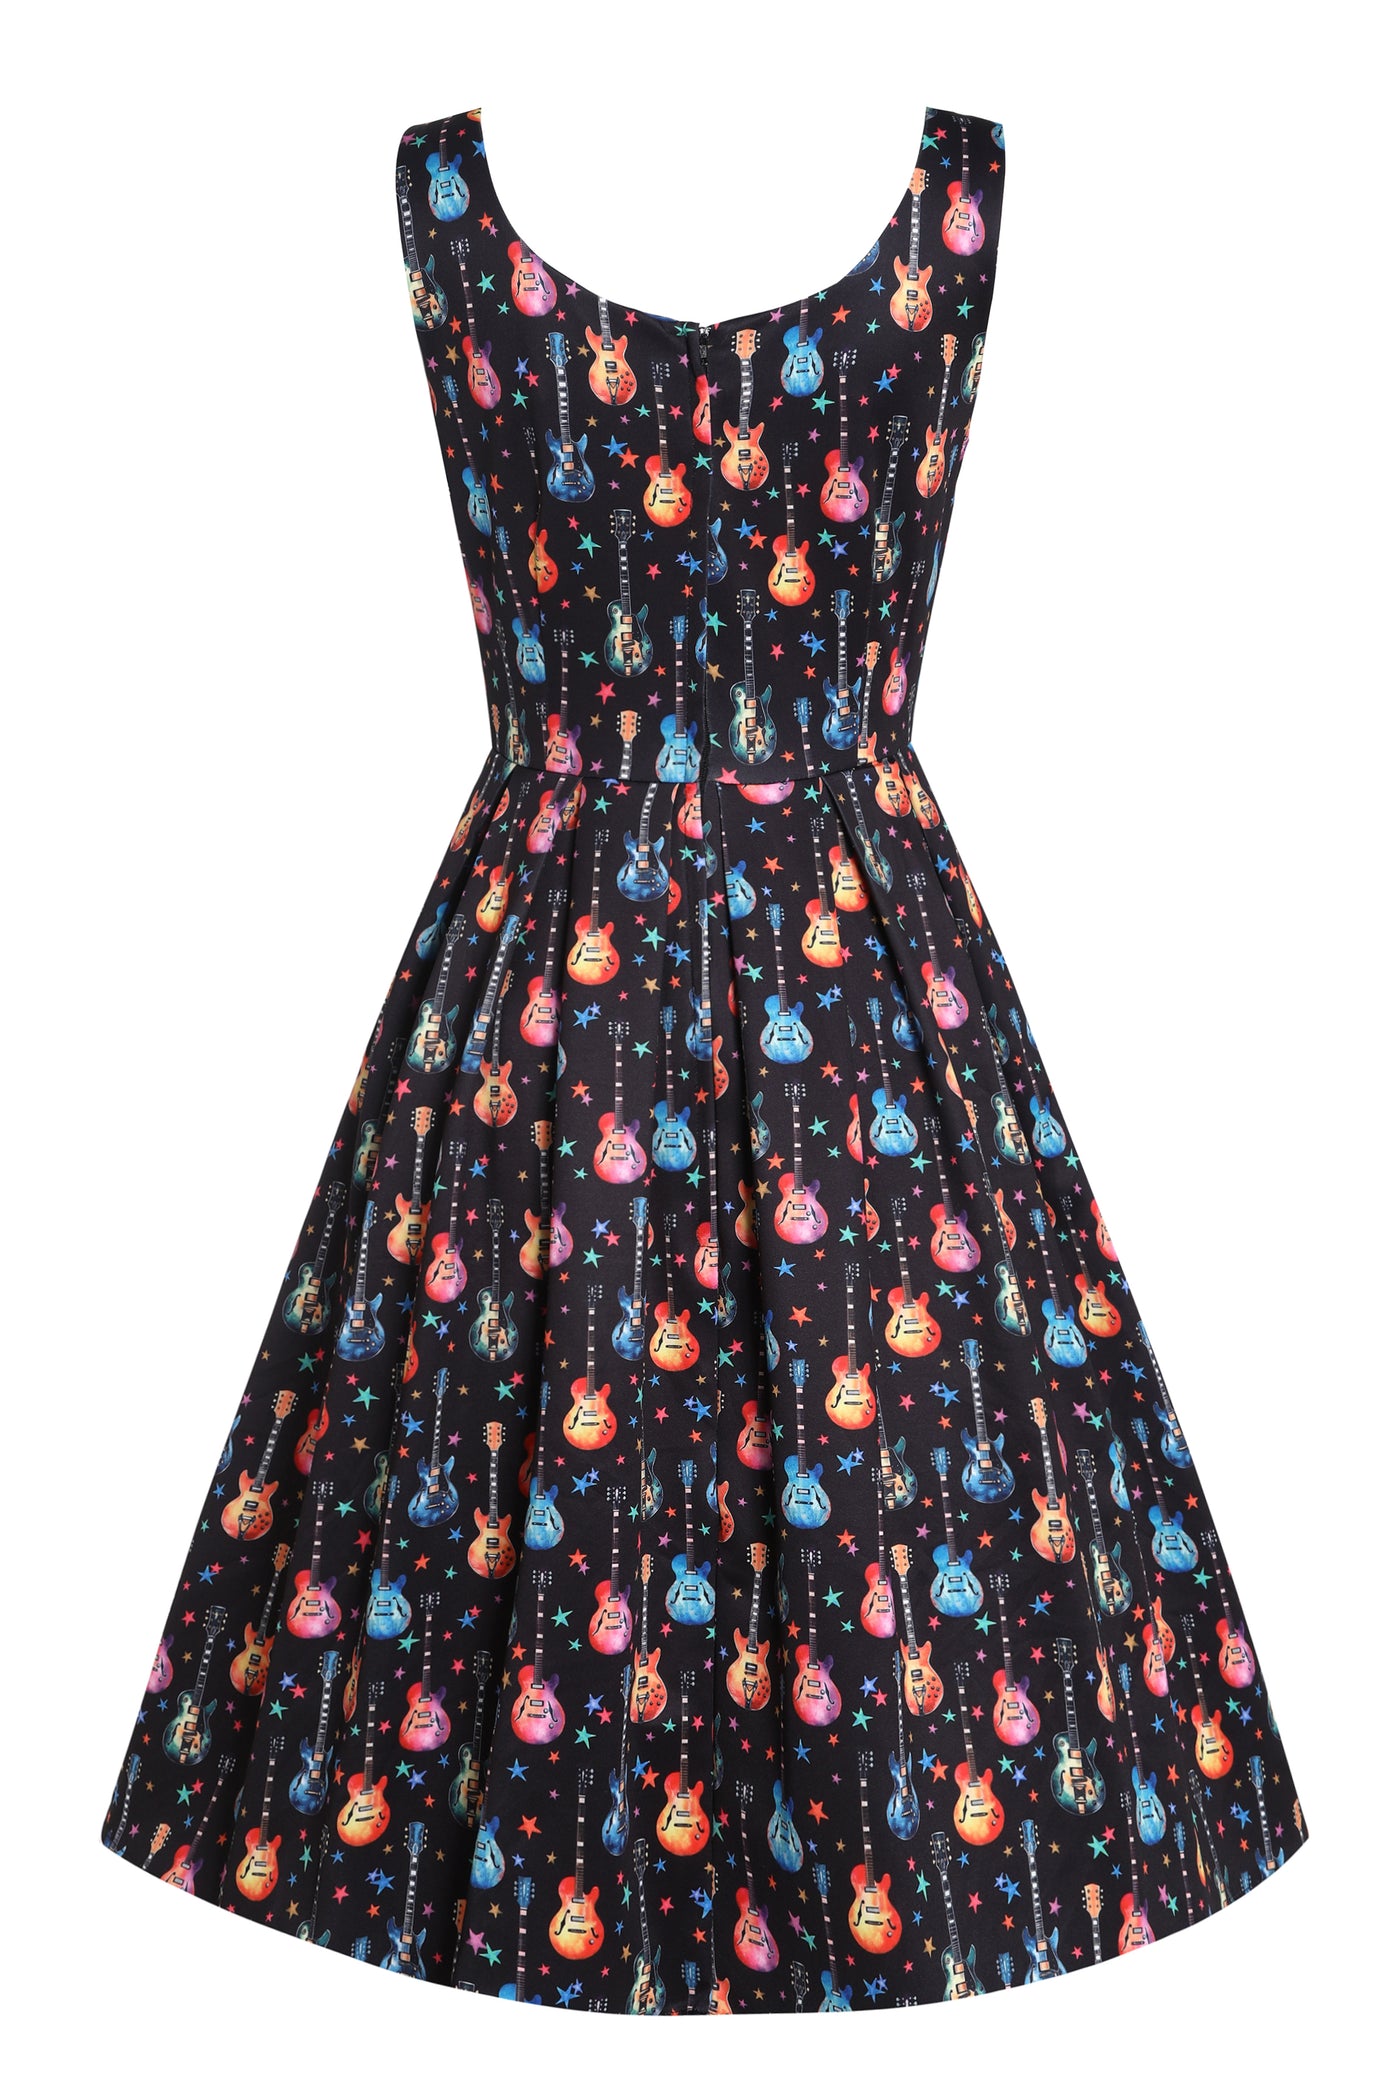 Back view of Black Pleated Dress in Guitar & Stars Print